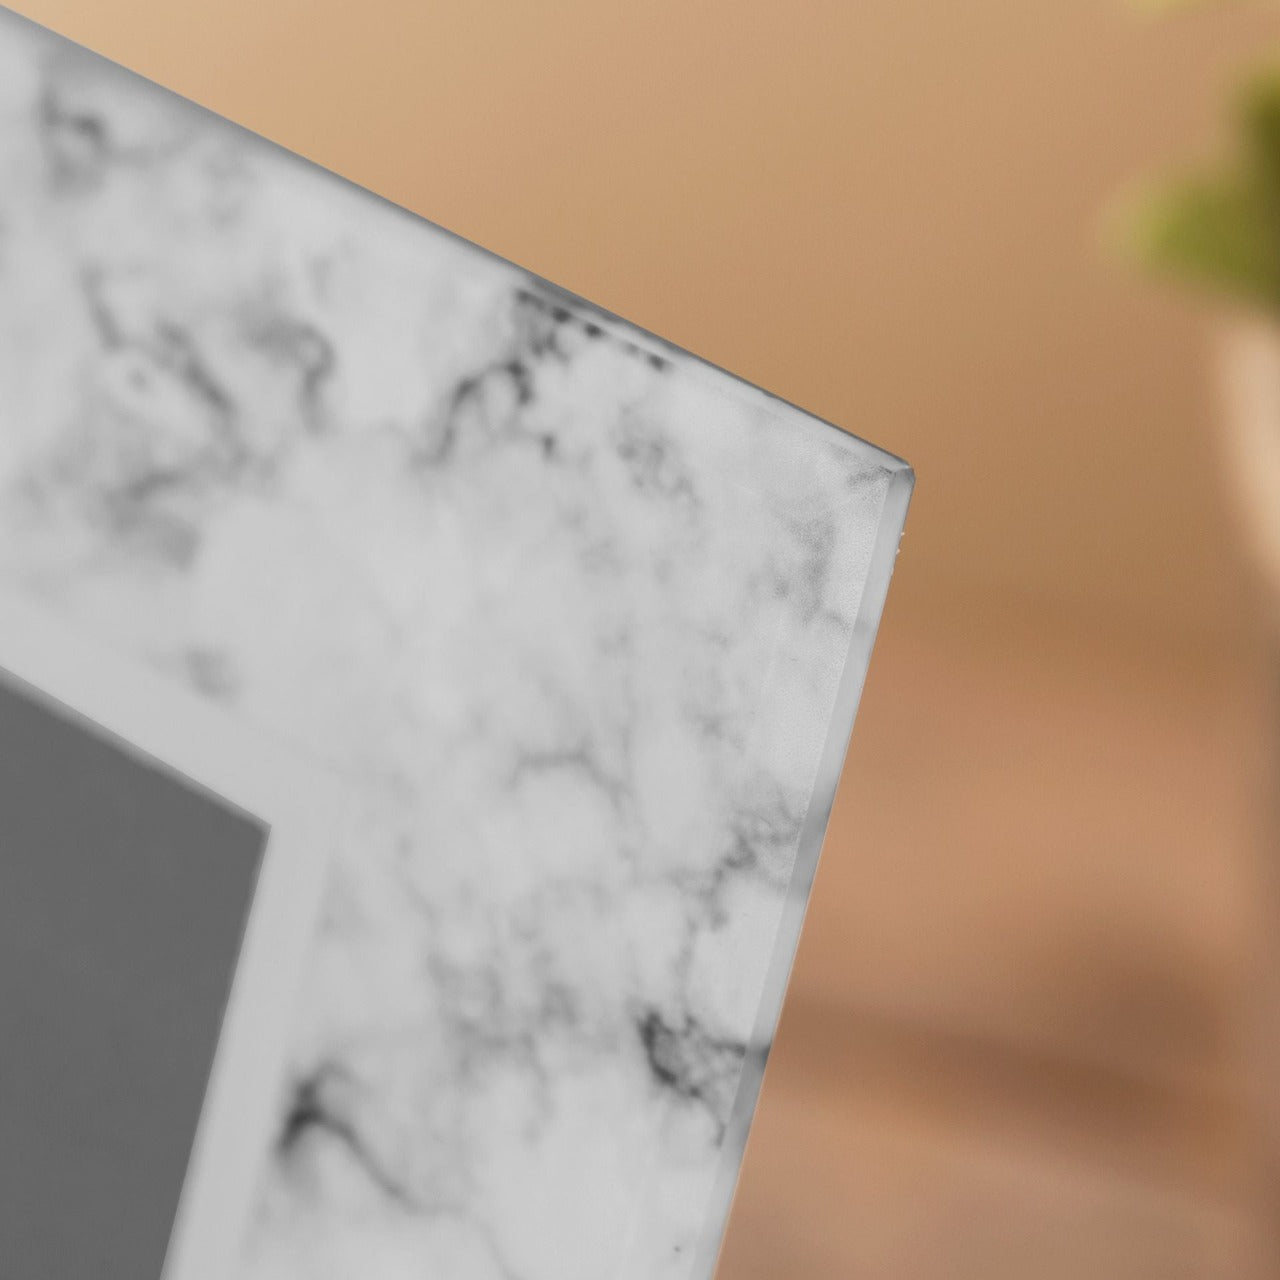 Hestia Glass Marble Effect Grey Photo Frame 5" x 7"  A bevelled glass, 5" x 7" portrait photo frame, with marble detailing. From the Retreat collection from HESTIA® - Create a haven of soothing minimalism at home.